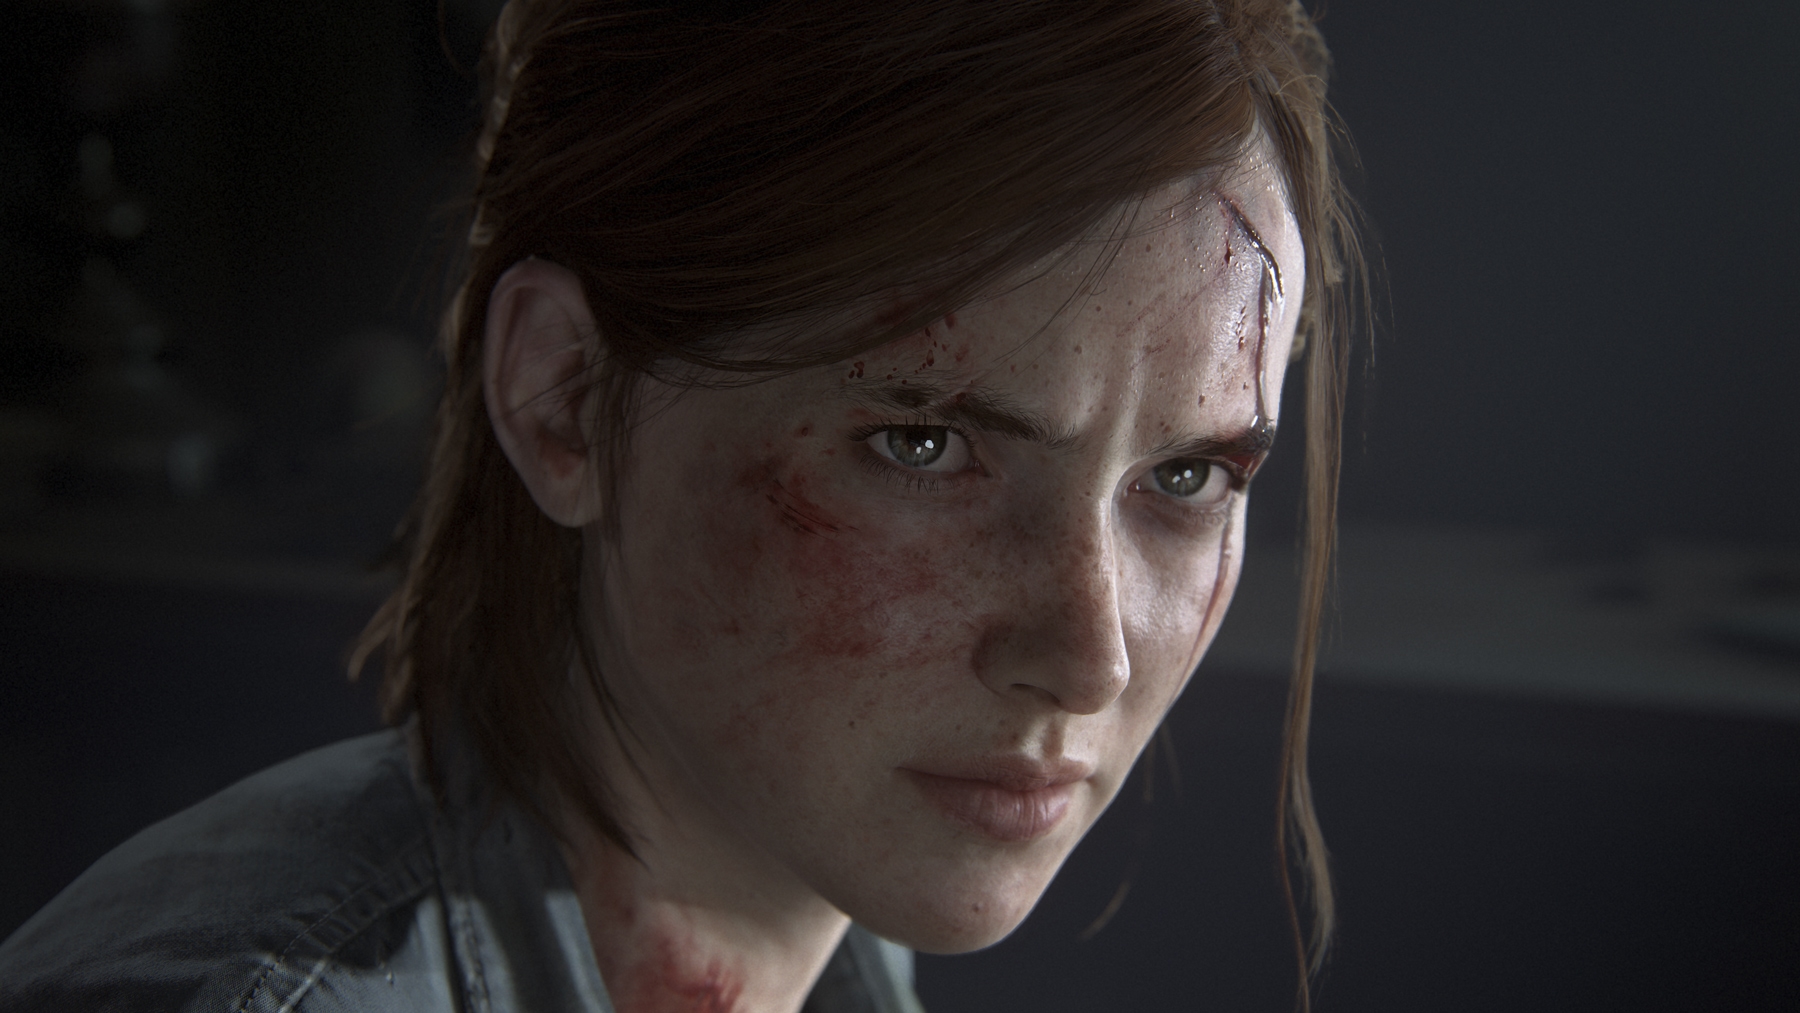 Major 'The Last of Us Part II' leak appears to show pivotal cutscenes | DeviceDaily.com